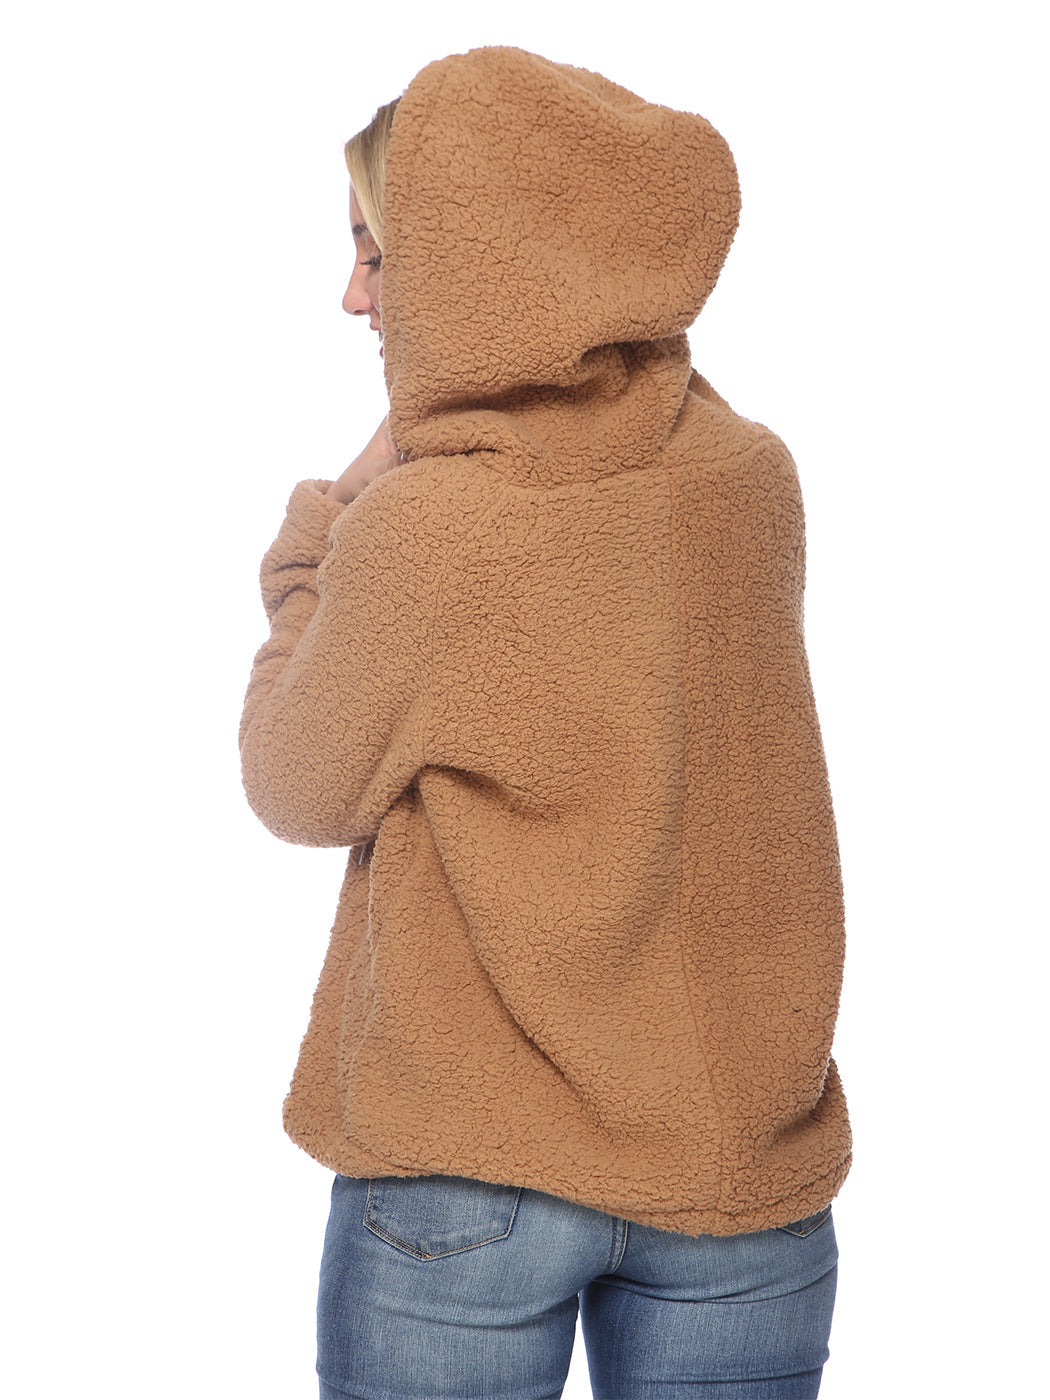 Fuzzy Sherpa Oversized Pullover Hoodie